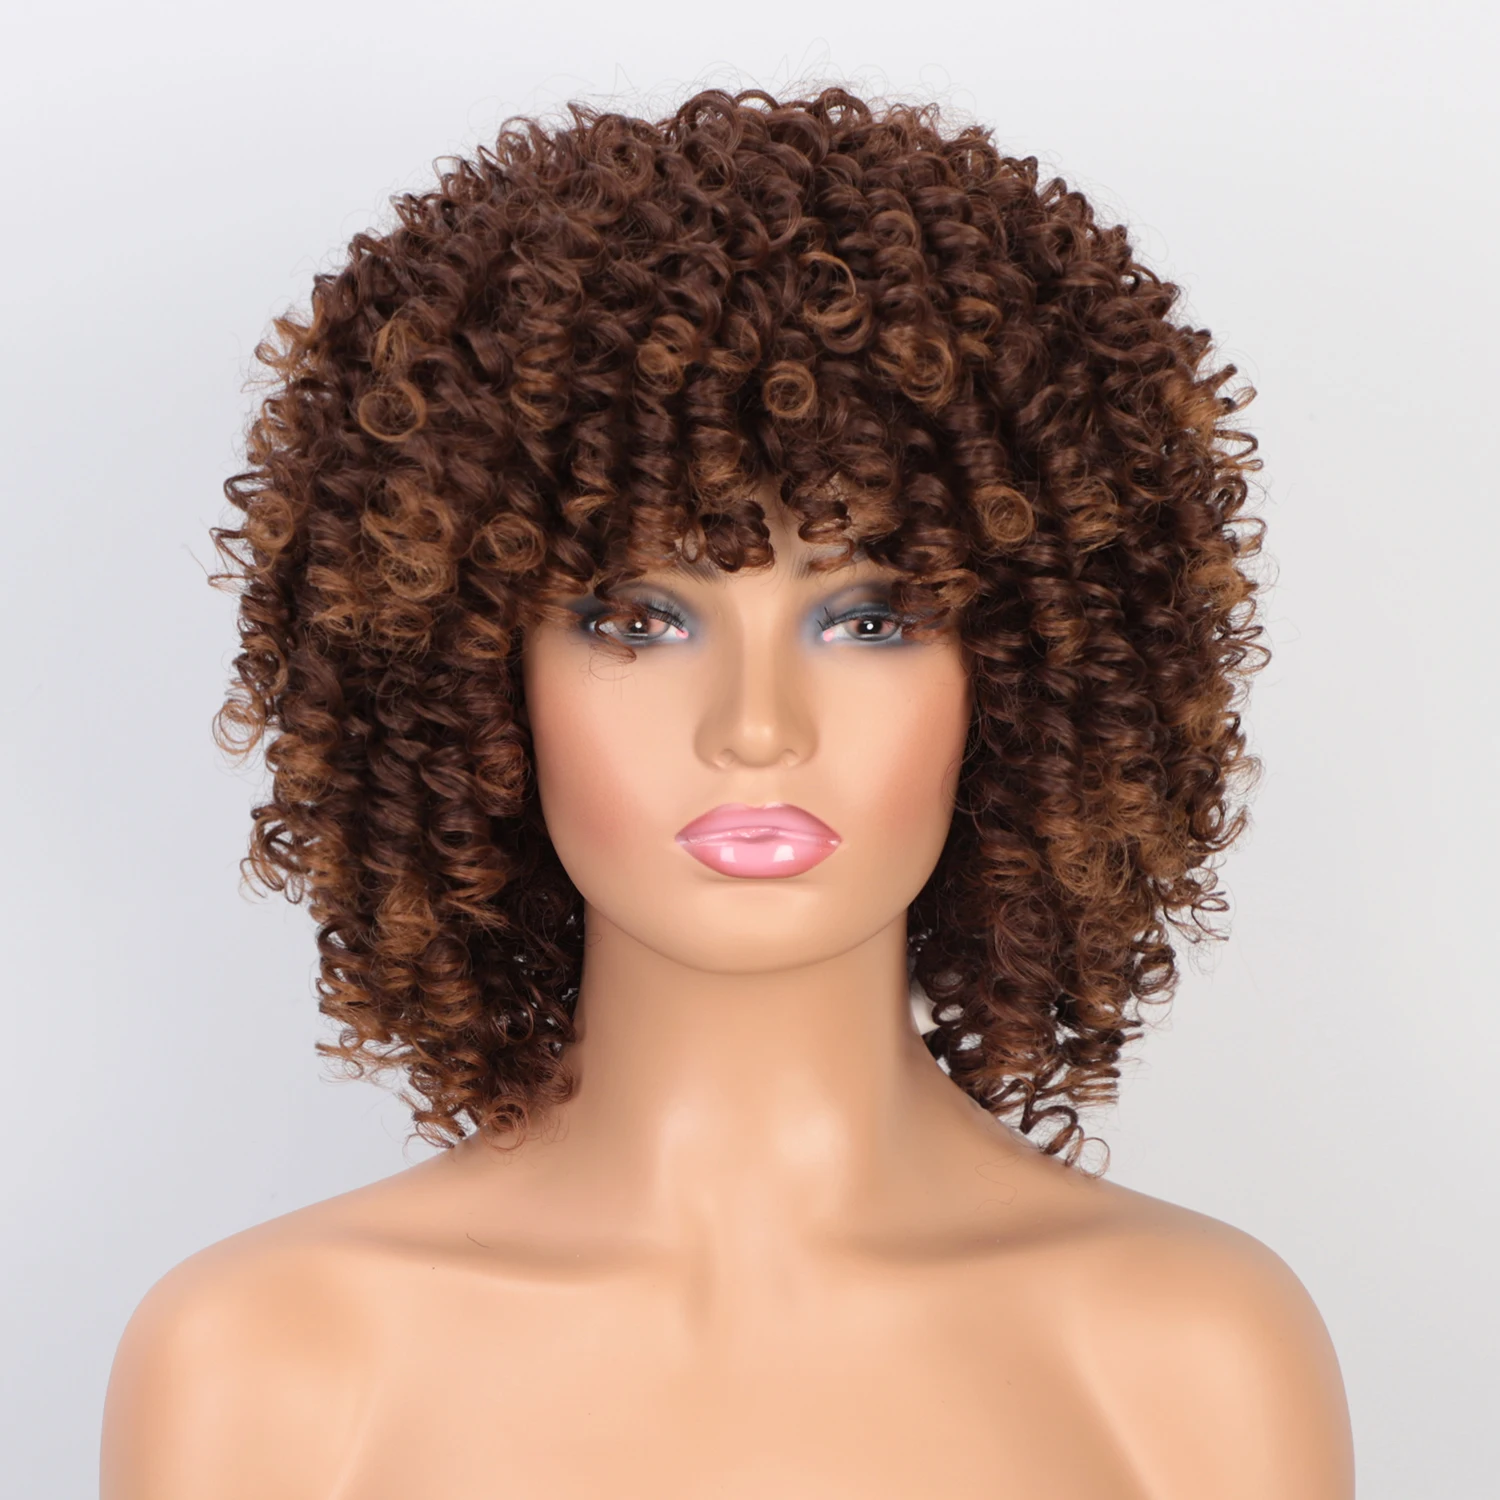 

High Vendor Cheap Wholesale Short Bob Afro Kinky Loose Curly Wave Brown Wig With Bangs For Black Women Synthetic Hair Wigs